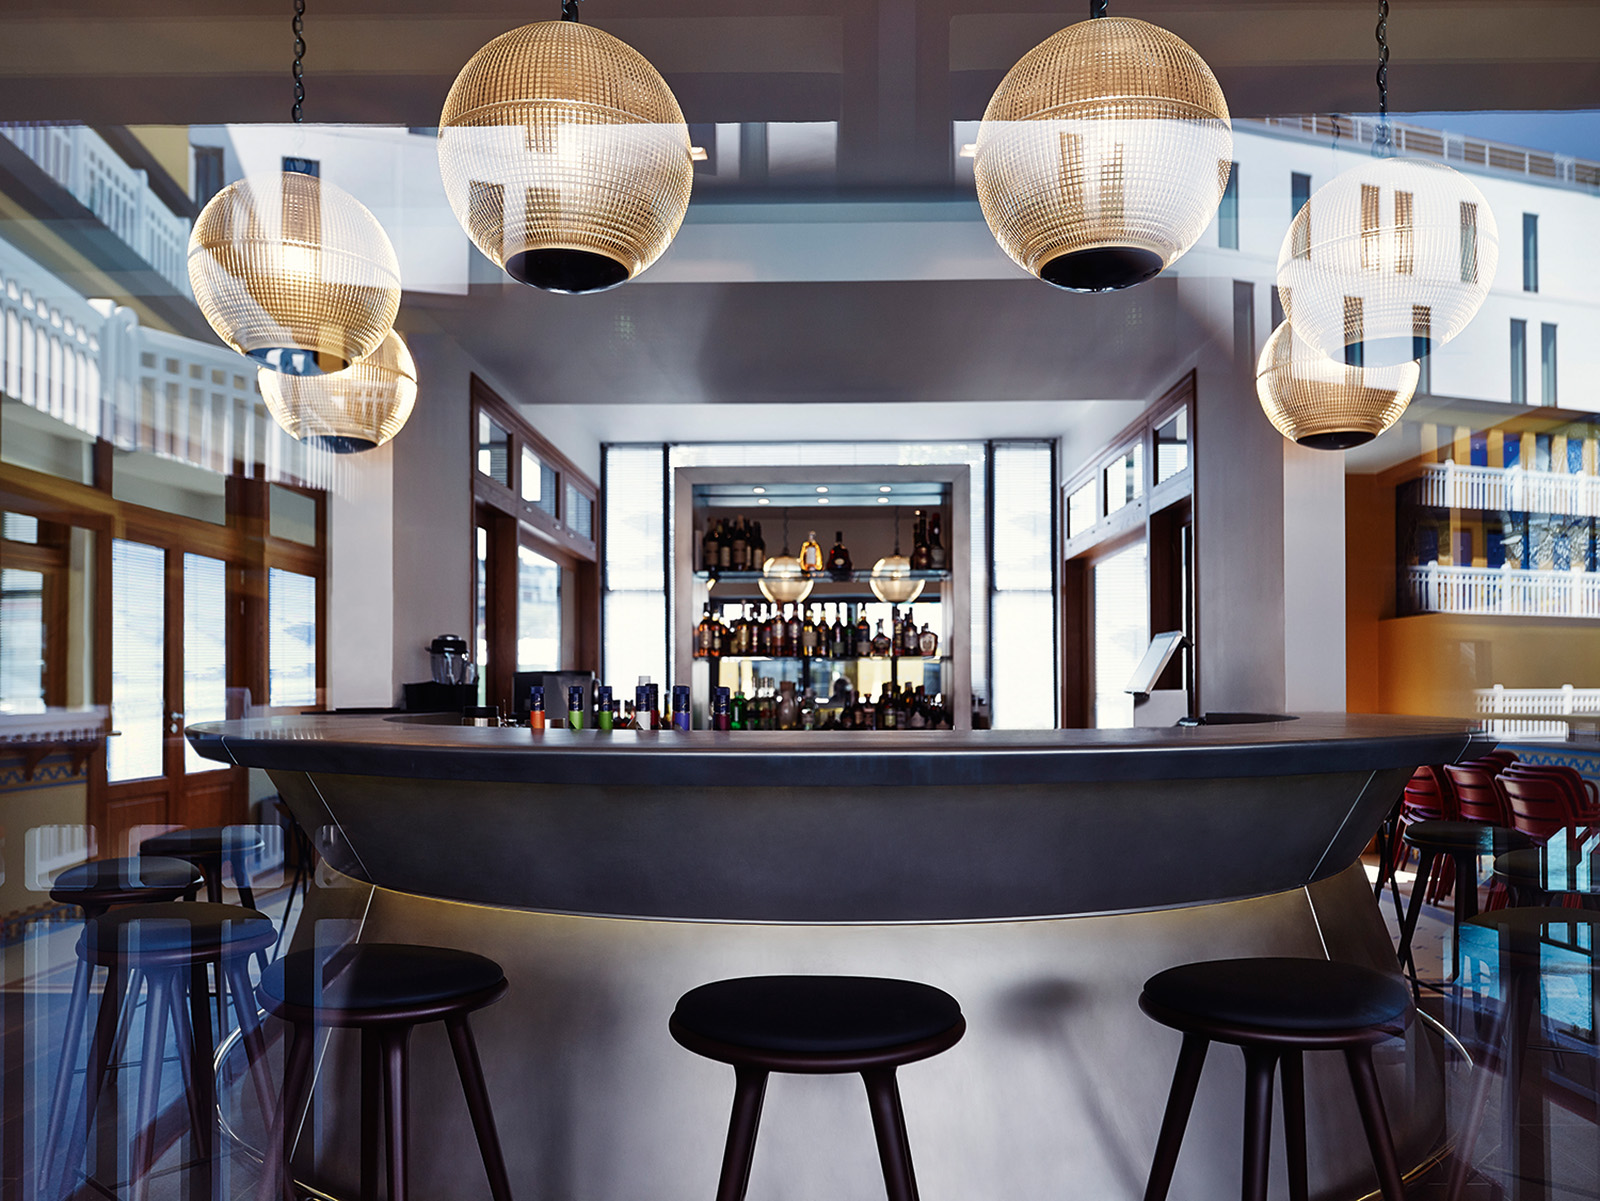 Bar of the urban brasserie of the molitor hotel in Paris, luxury lifestyle hotel designed by the interior design studio jean-philippe nuel, interior design inspired by streetart